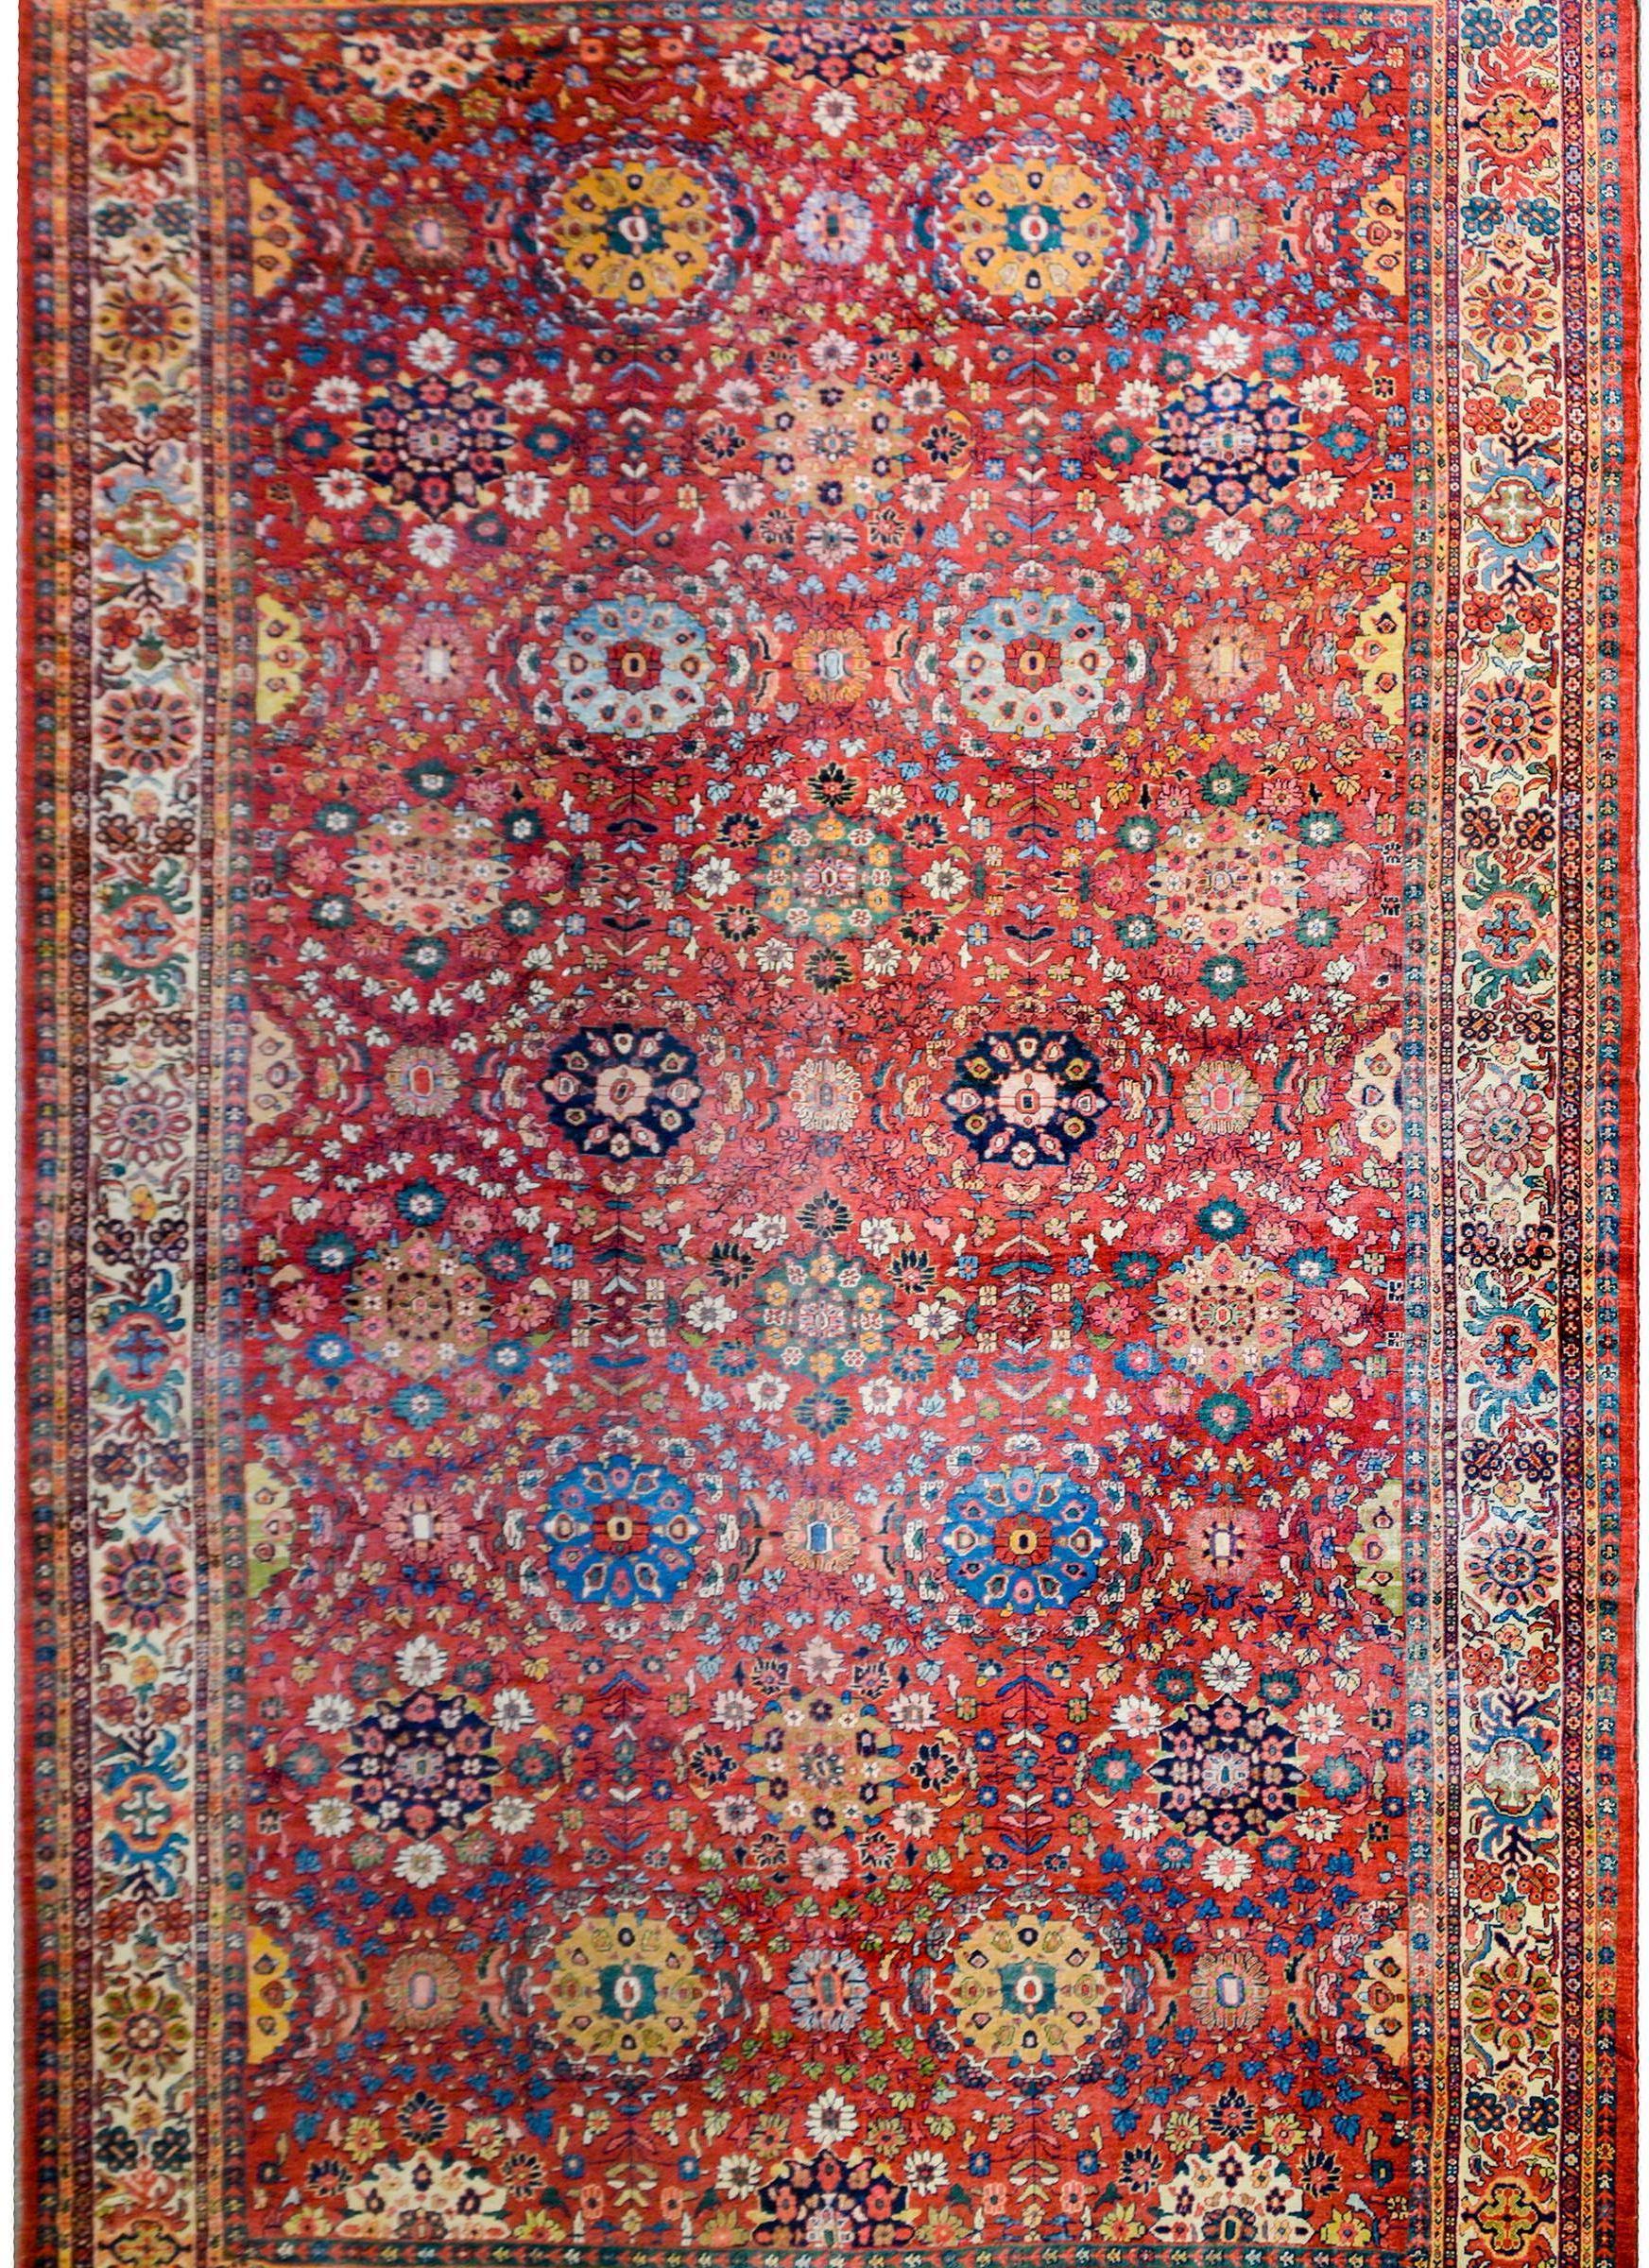 An unbelievable circa 1900s antique Persian Sultanabad rug with an exceptional overall pattern containing multiple large-scale multicolored flower medallions amidst a tightly woven pattern of scrolling vines with leaves and flowers on a crimson